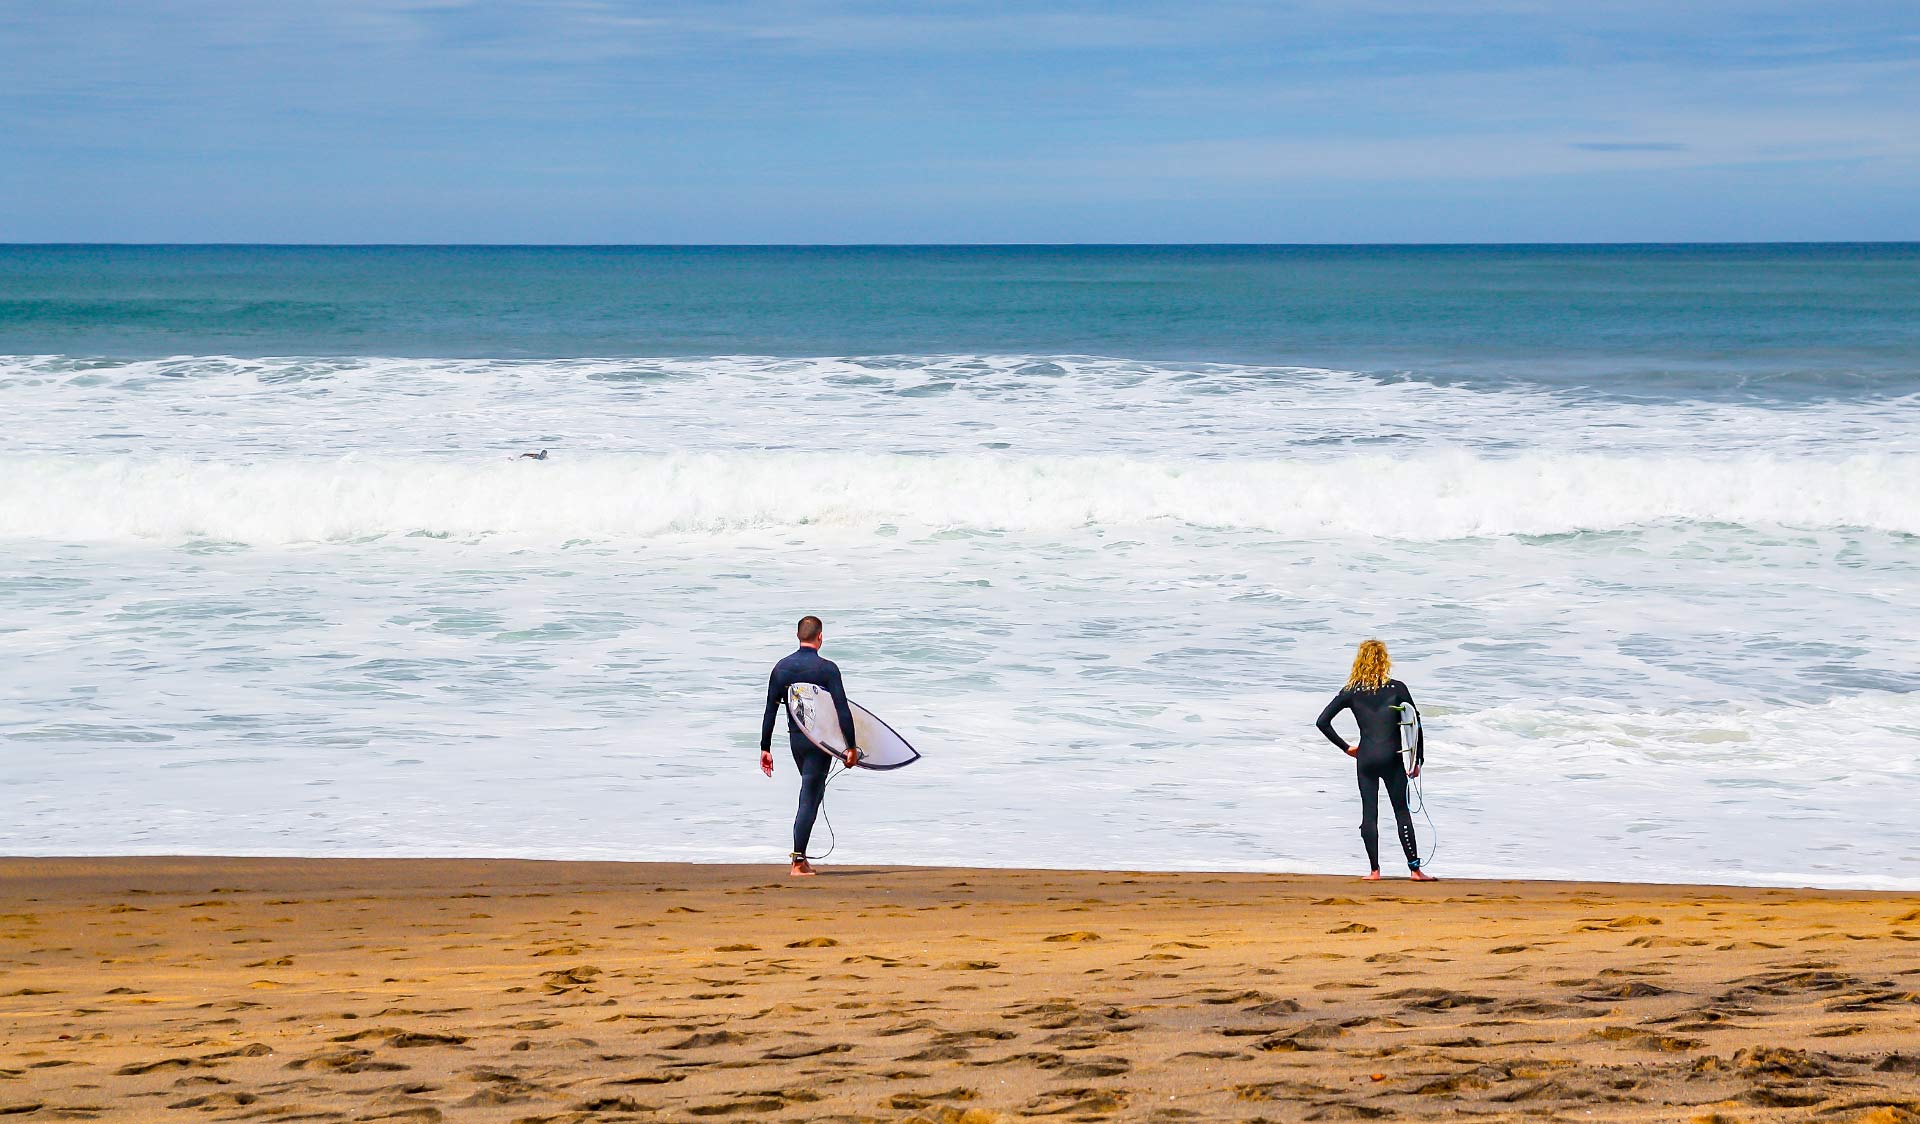 Two men with surfboards look out over the ocean